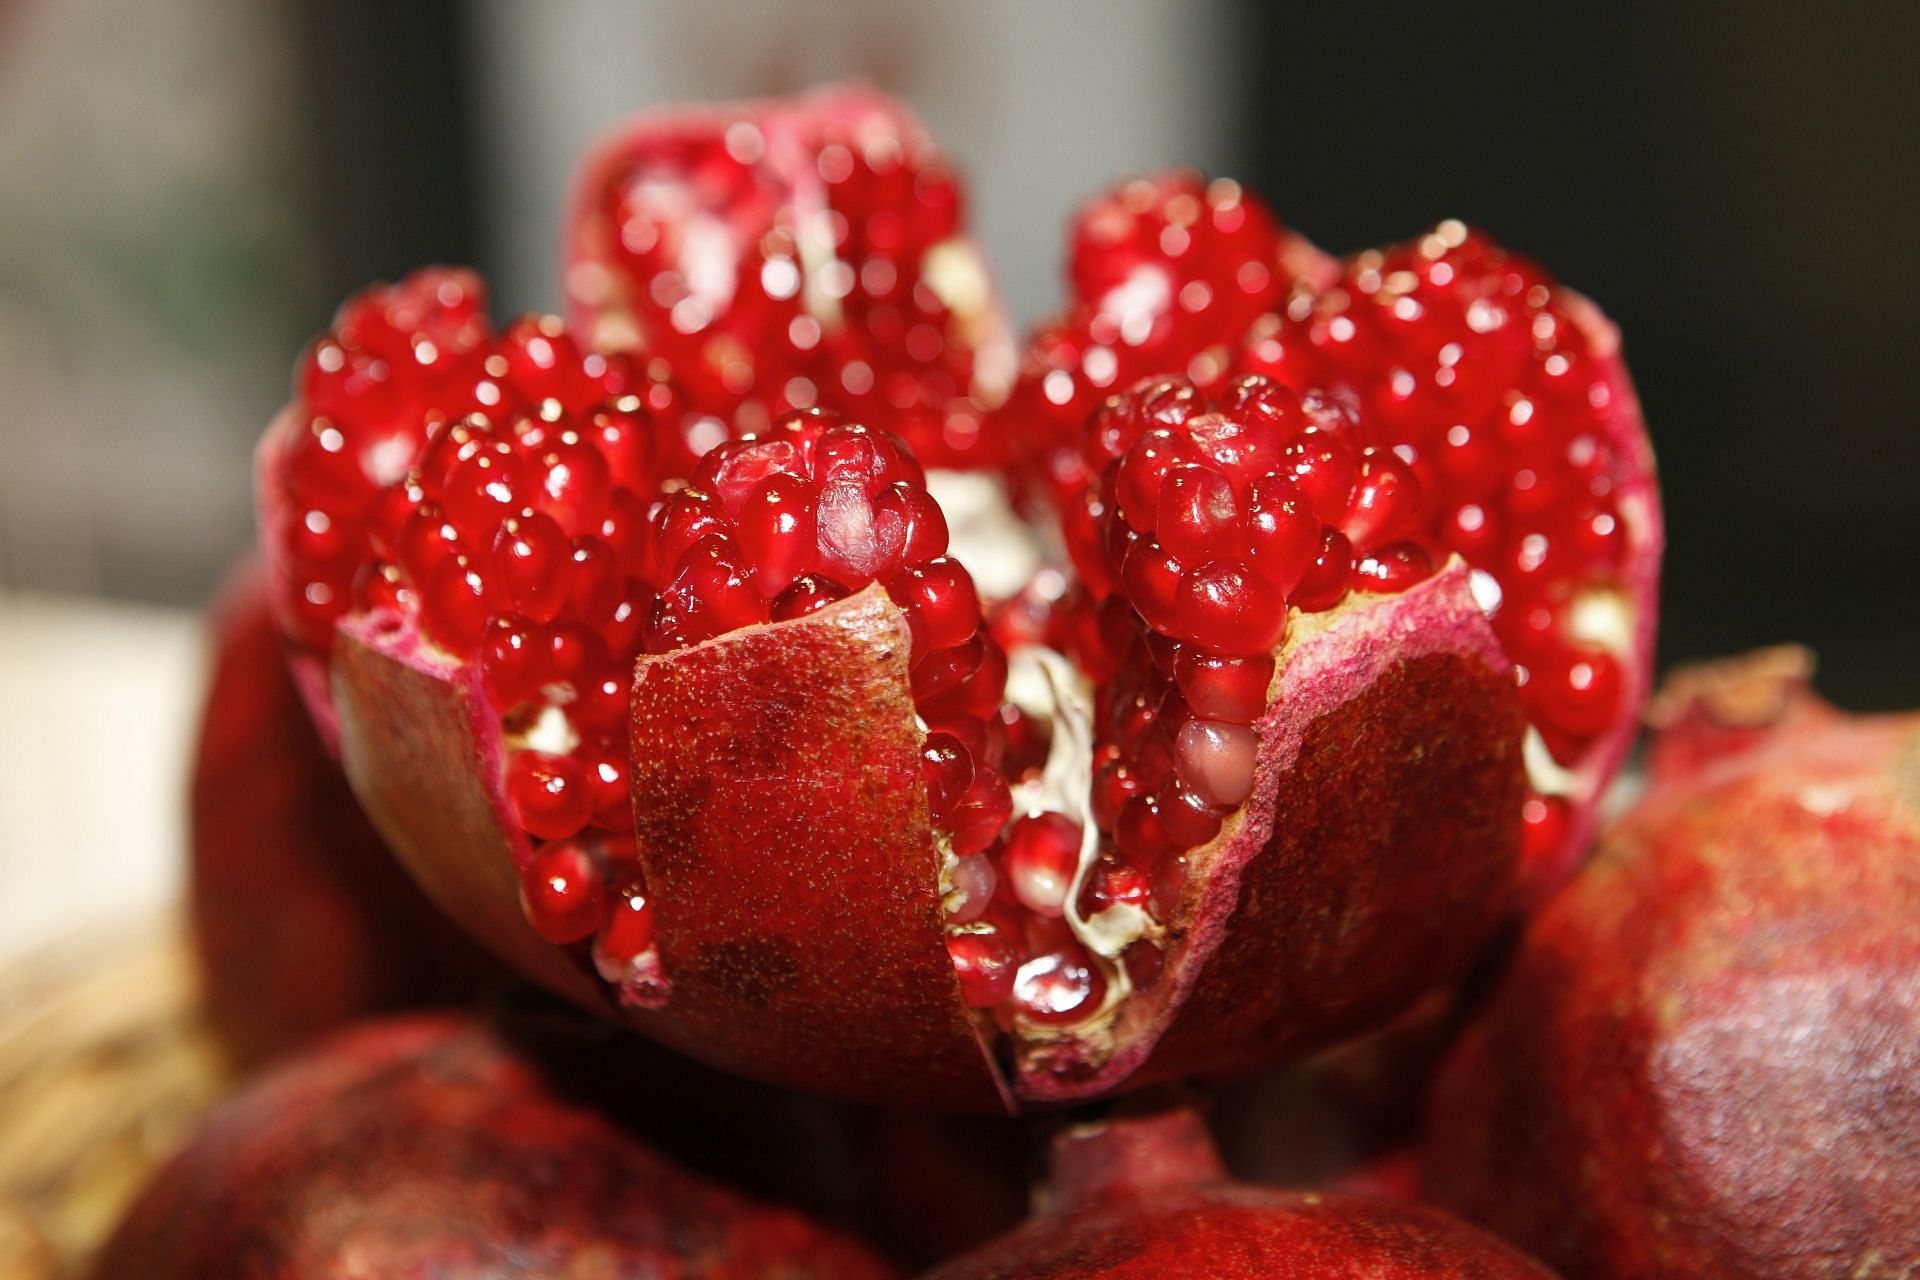 nutritional benefits of having red fruits and vegetables (image sourced via Pexels / Photo by Kindel Media)